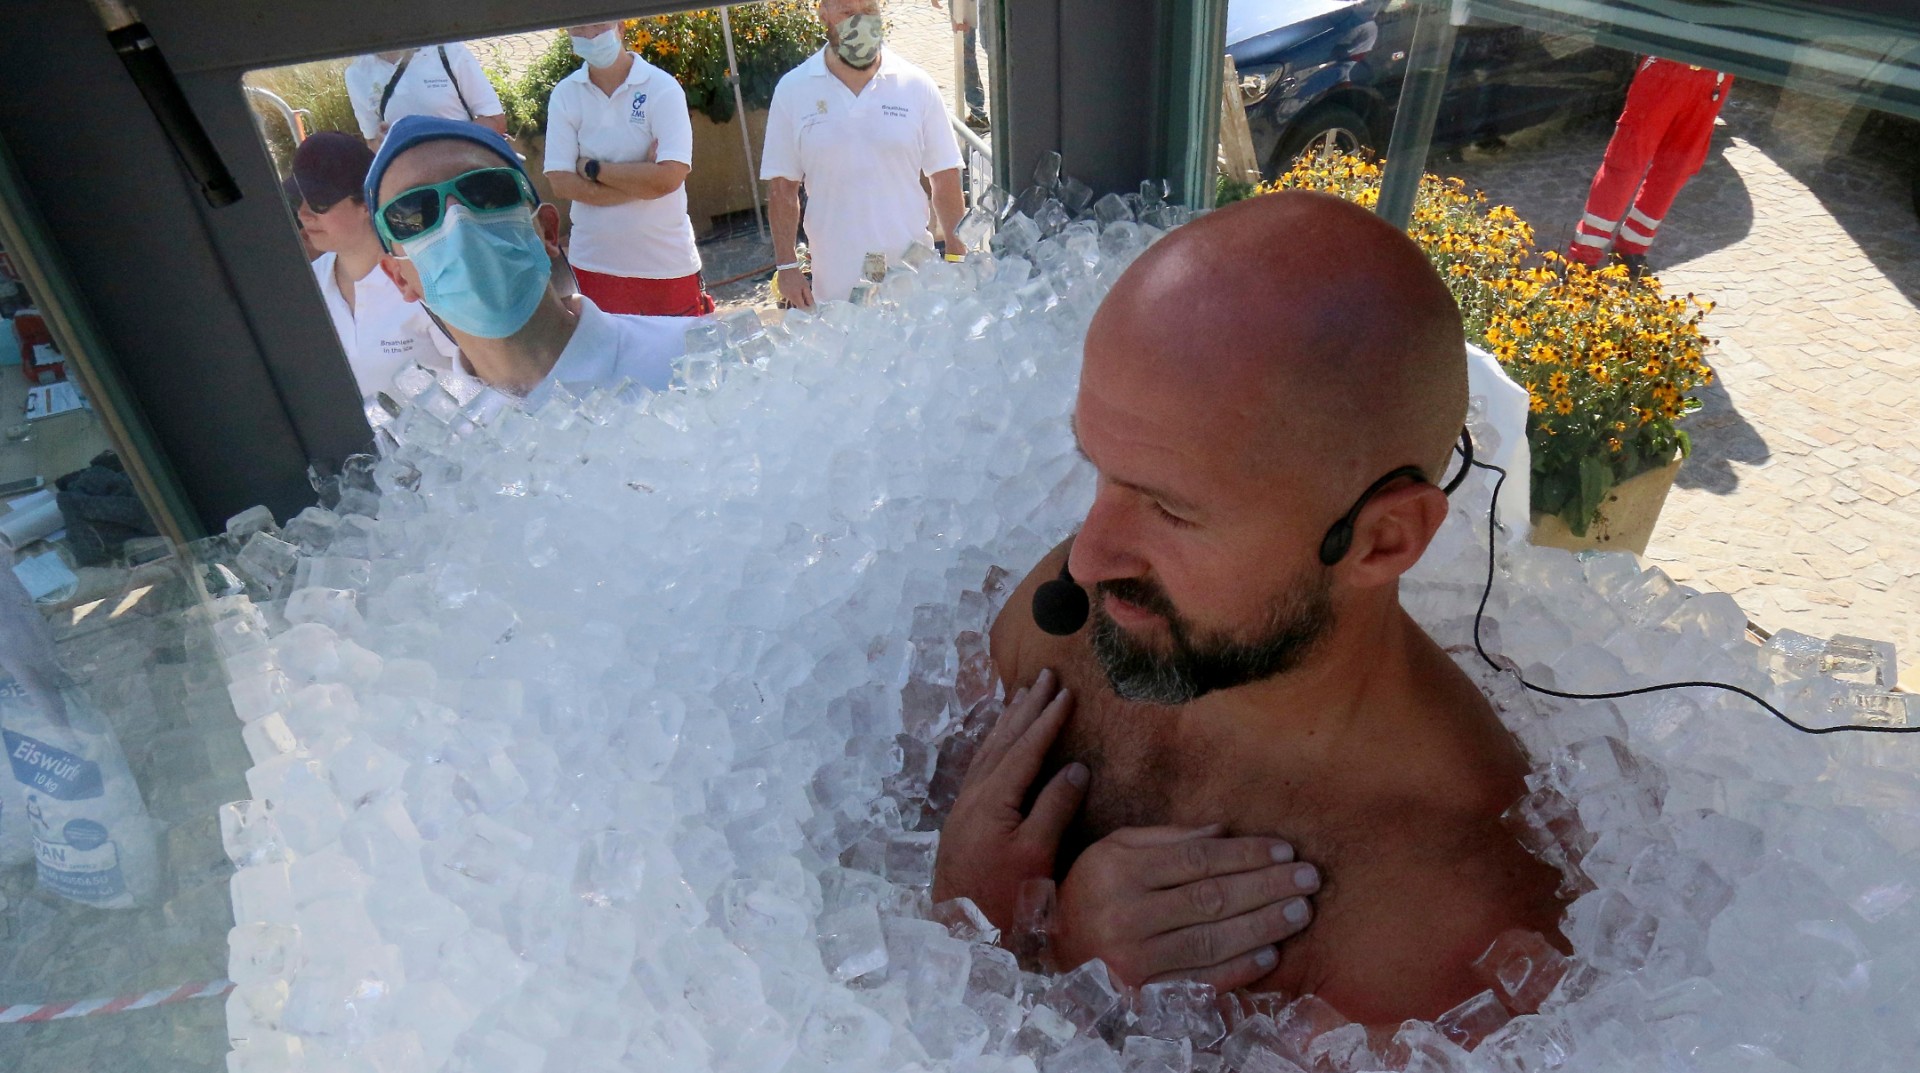 Austrian Man Spends 2.5 Hours in Box Filled With Ice Cubes